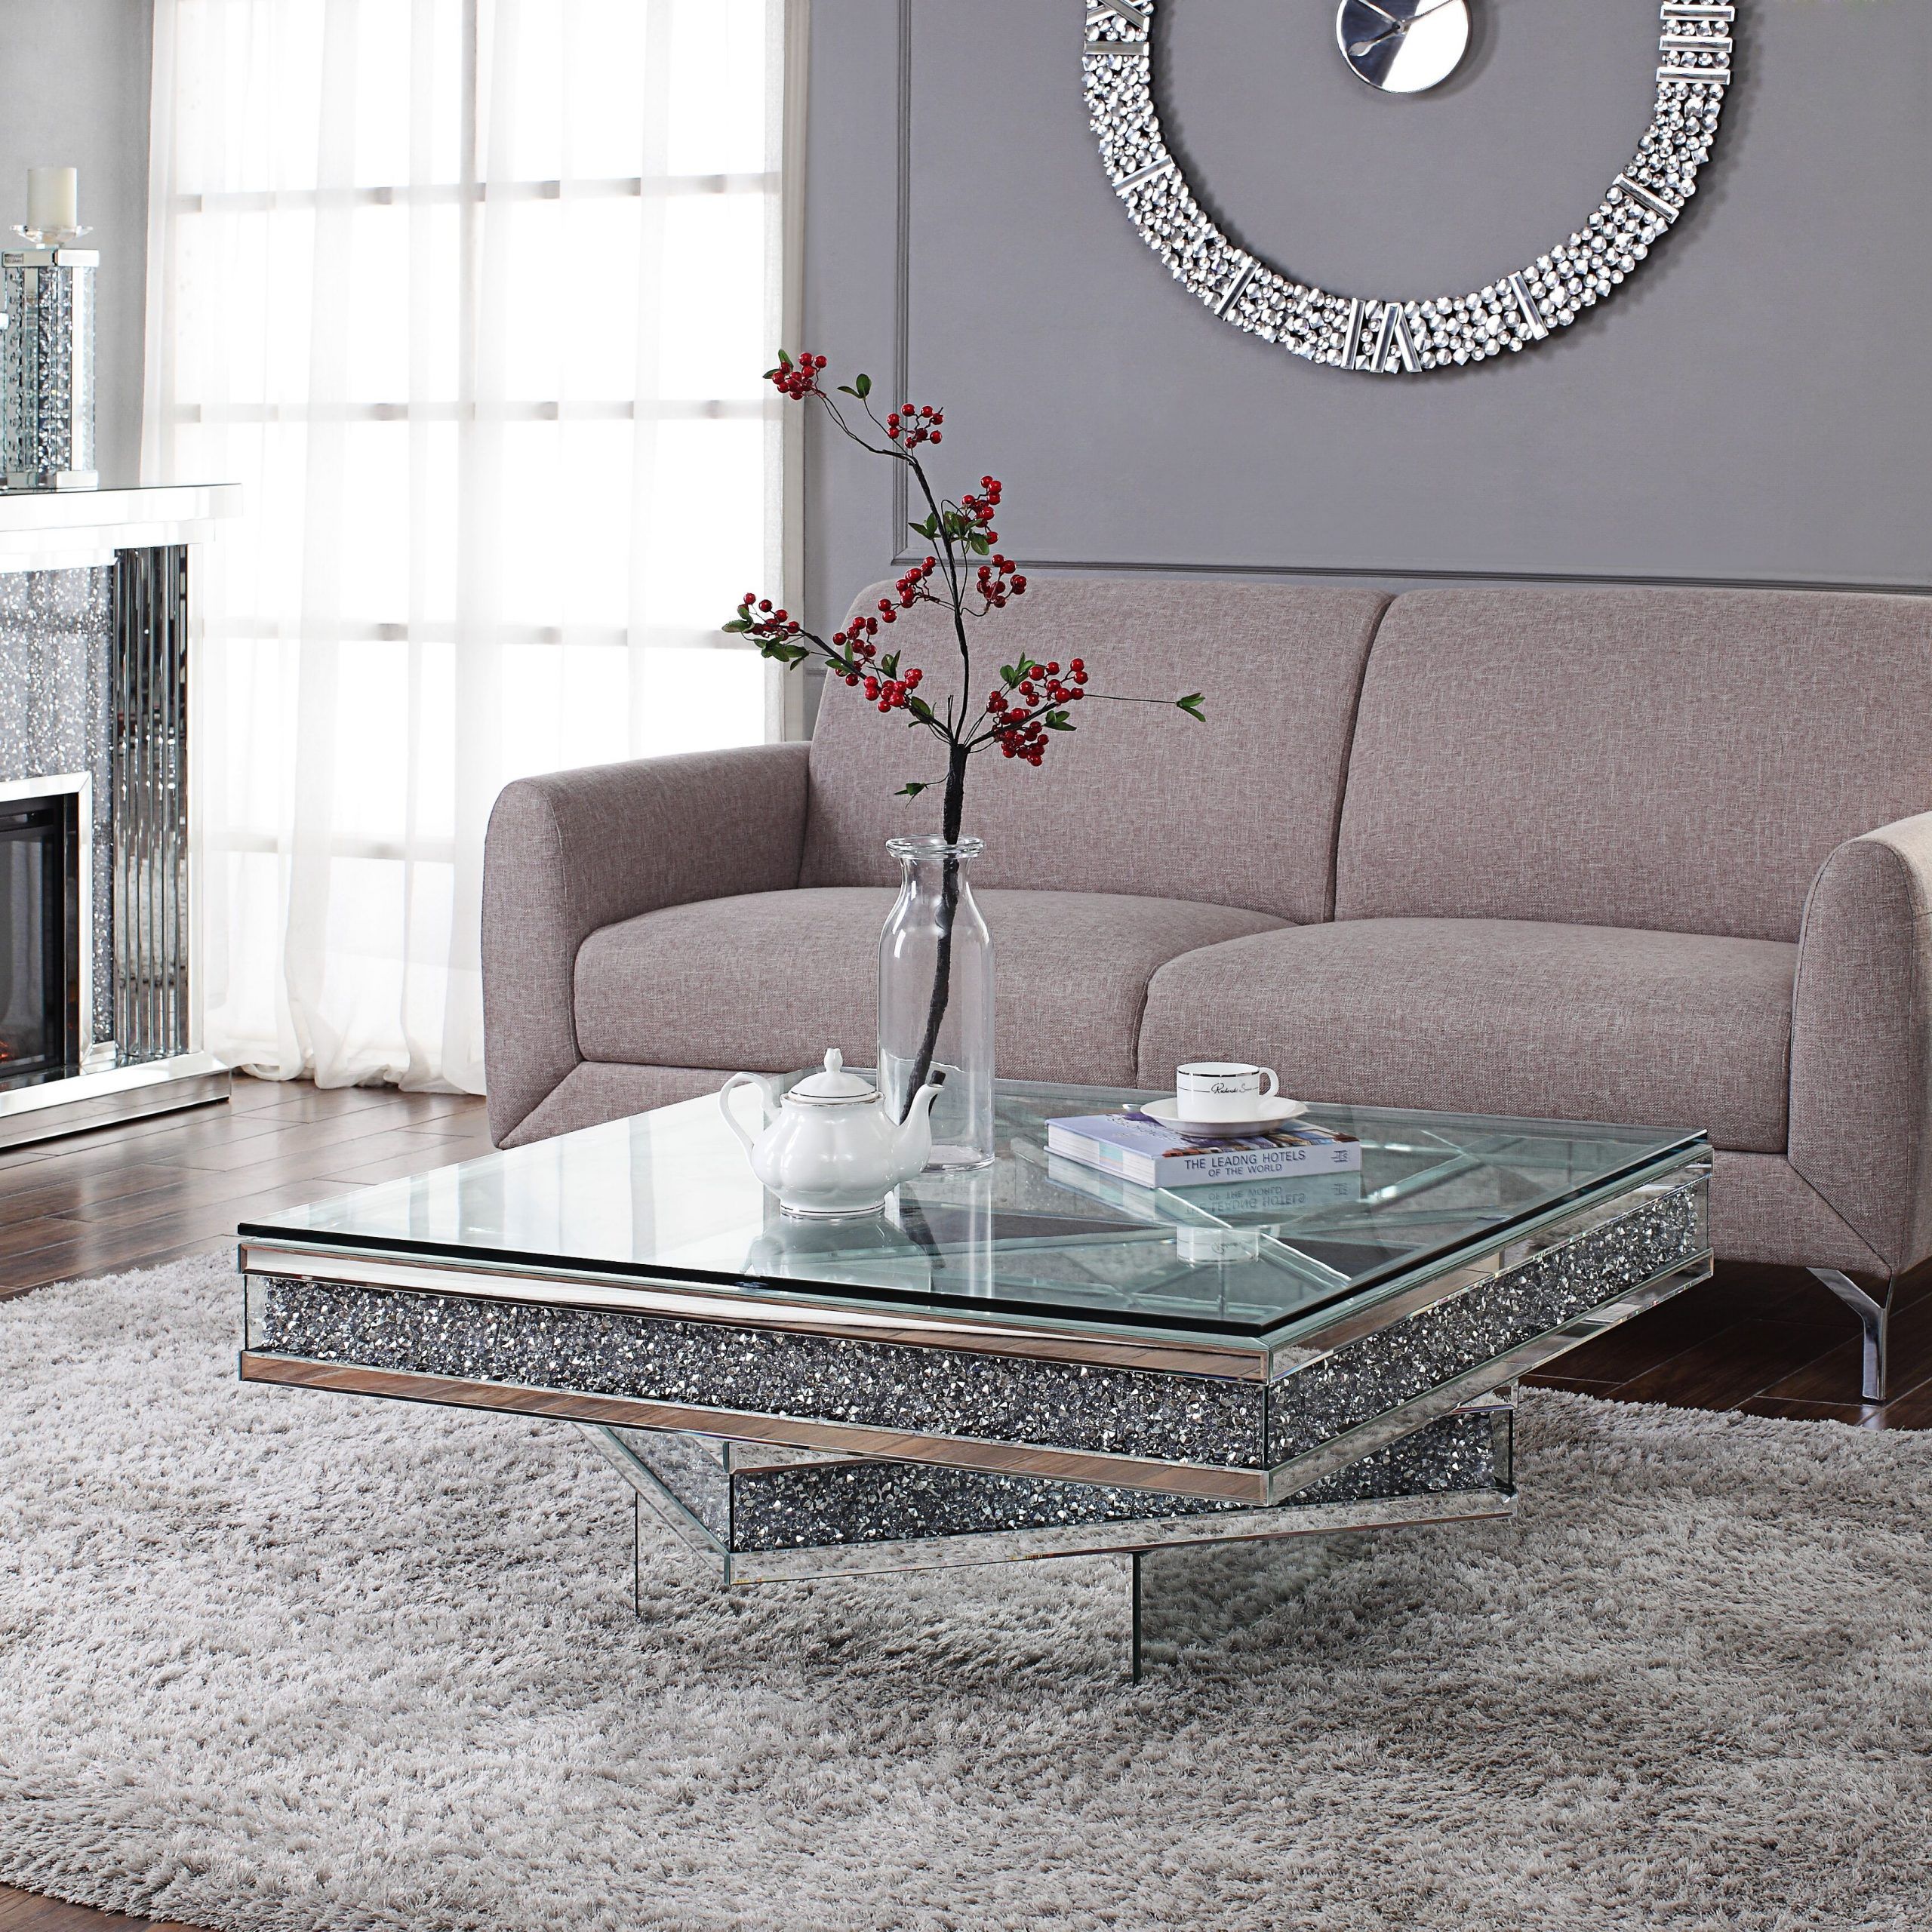 Acme Furniture Noralie Coffee Table In Mirrored & Faux Diamonds –  Walmart With Regard To Mirrored Coffee Tables (View 13 of 20)